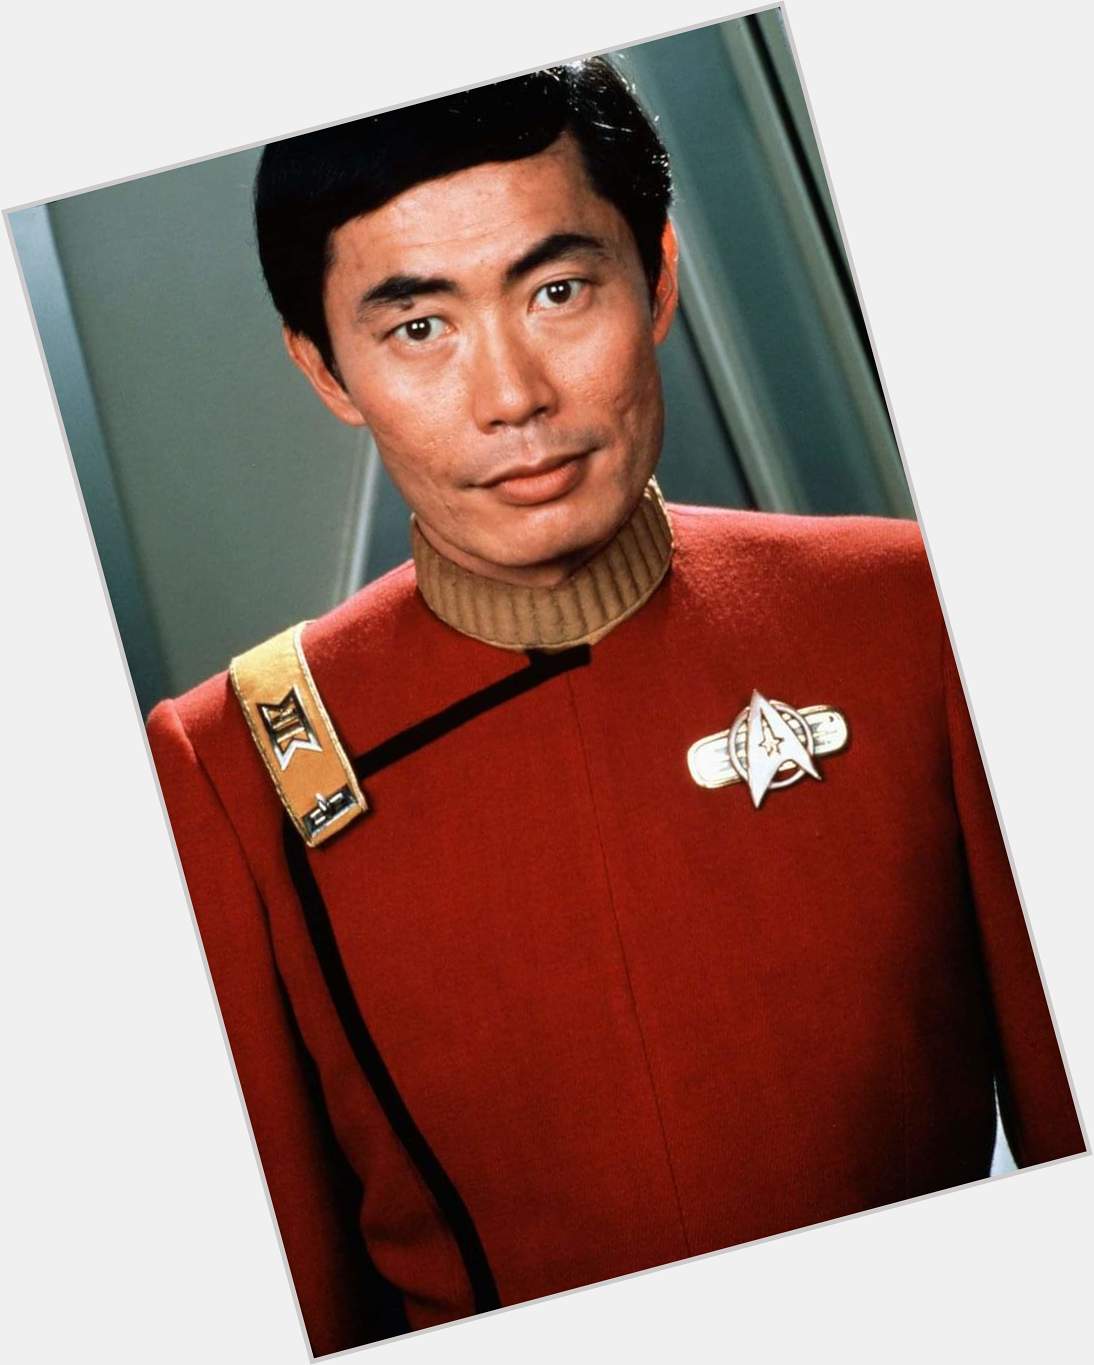 Happy Birthday to actor and Star Trek legend George Takei who turns 83 today! 